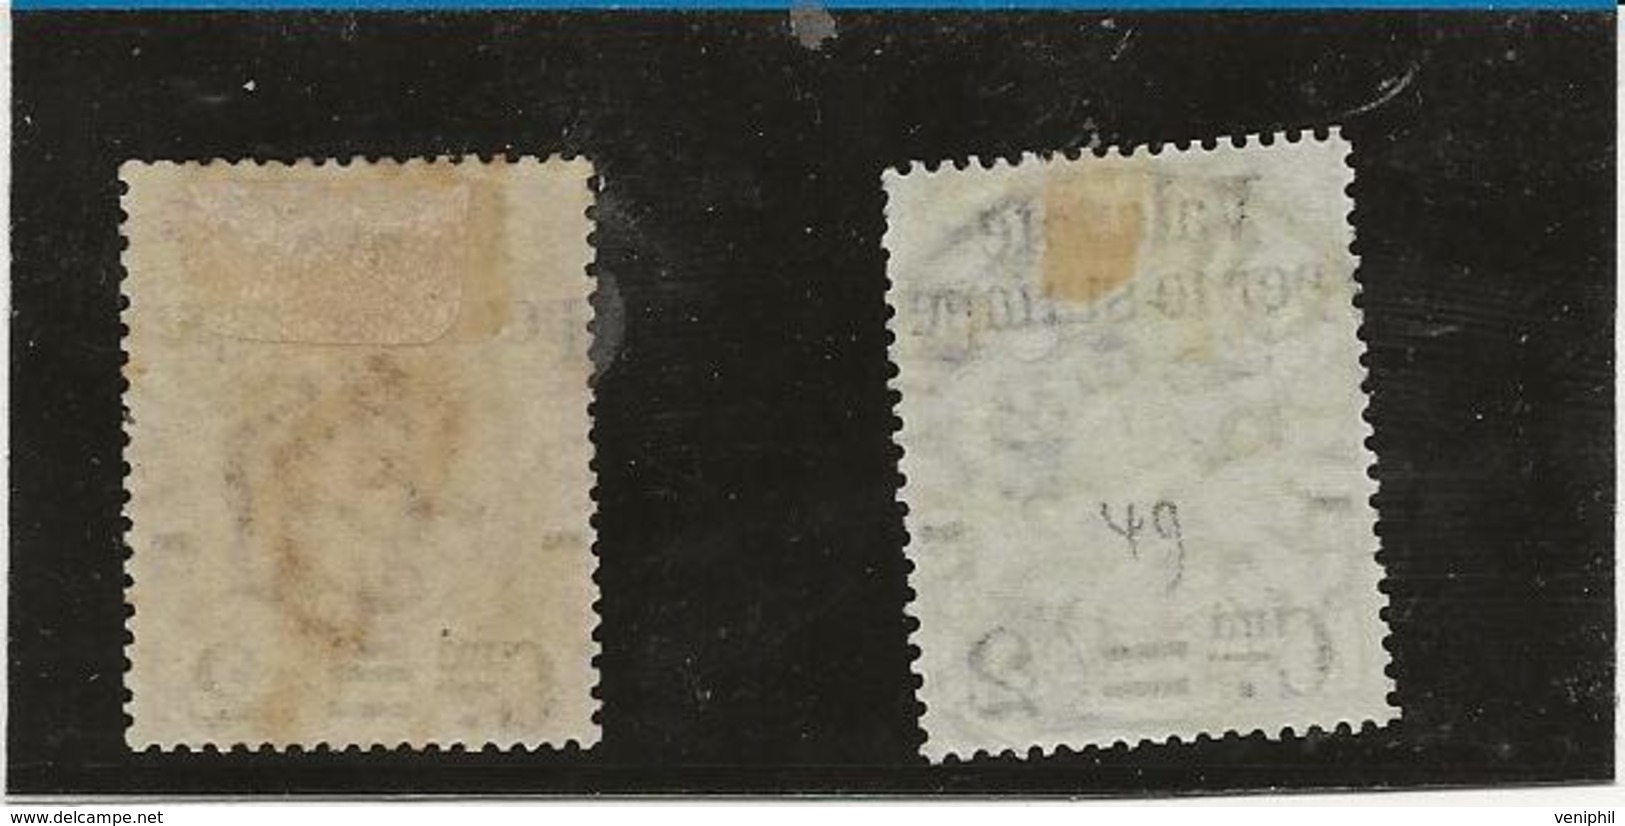 TIMBRES N° 48 NEUF S GOMME + N° 49 OBLITERE - ANNEE 1890 - COTE : 40 € - Used